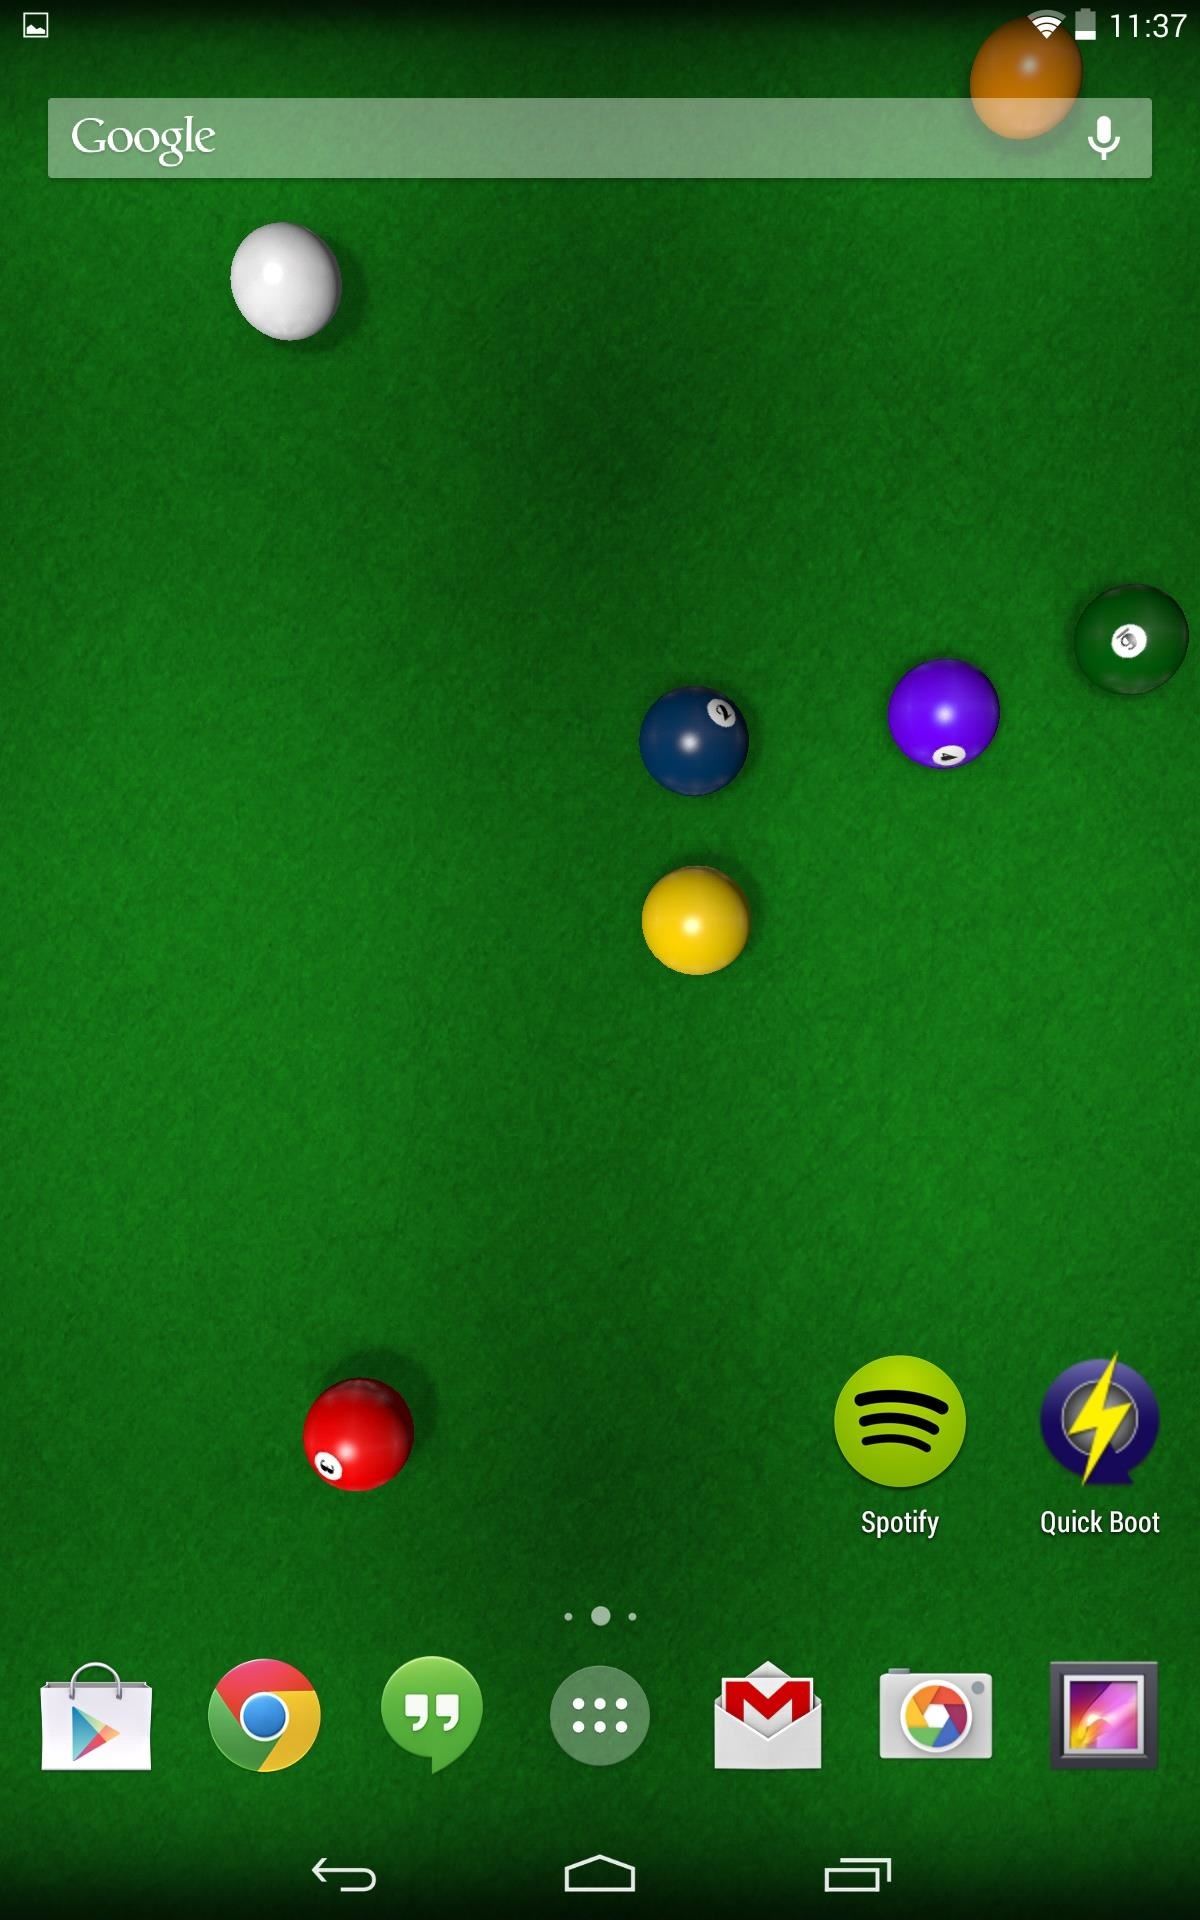 Boredom Killer: How to Play a Game of Pool Directly on Your Android Home Screen